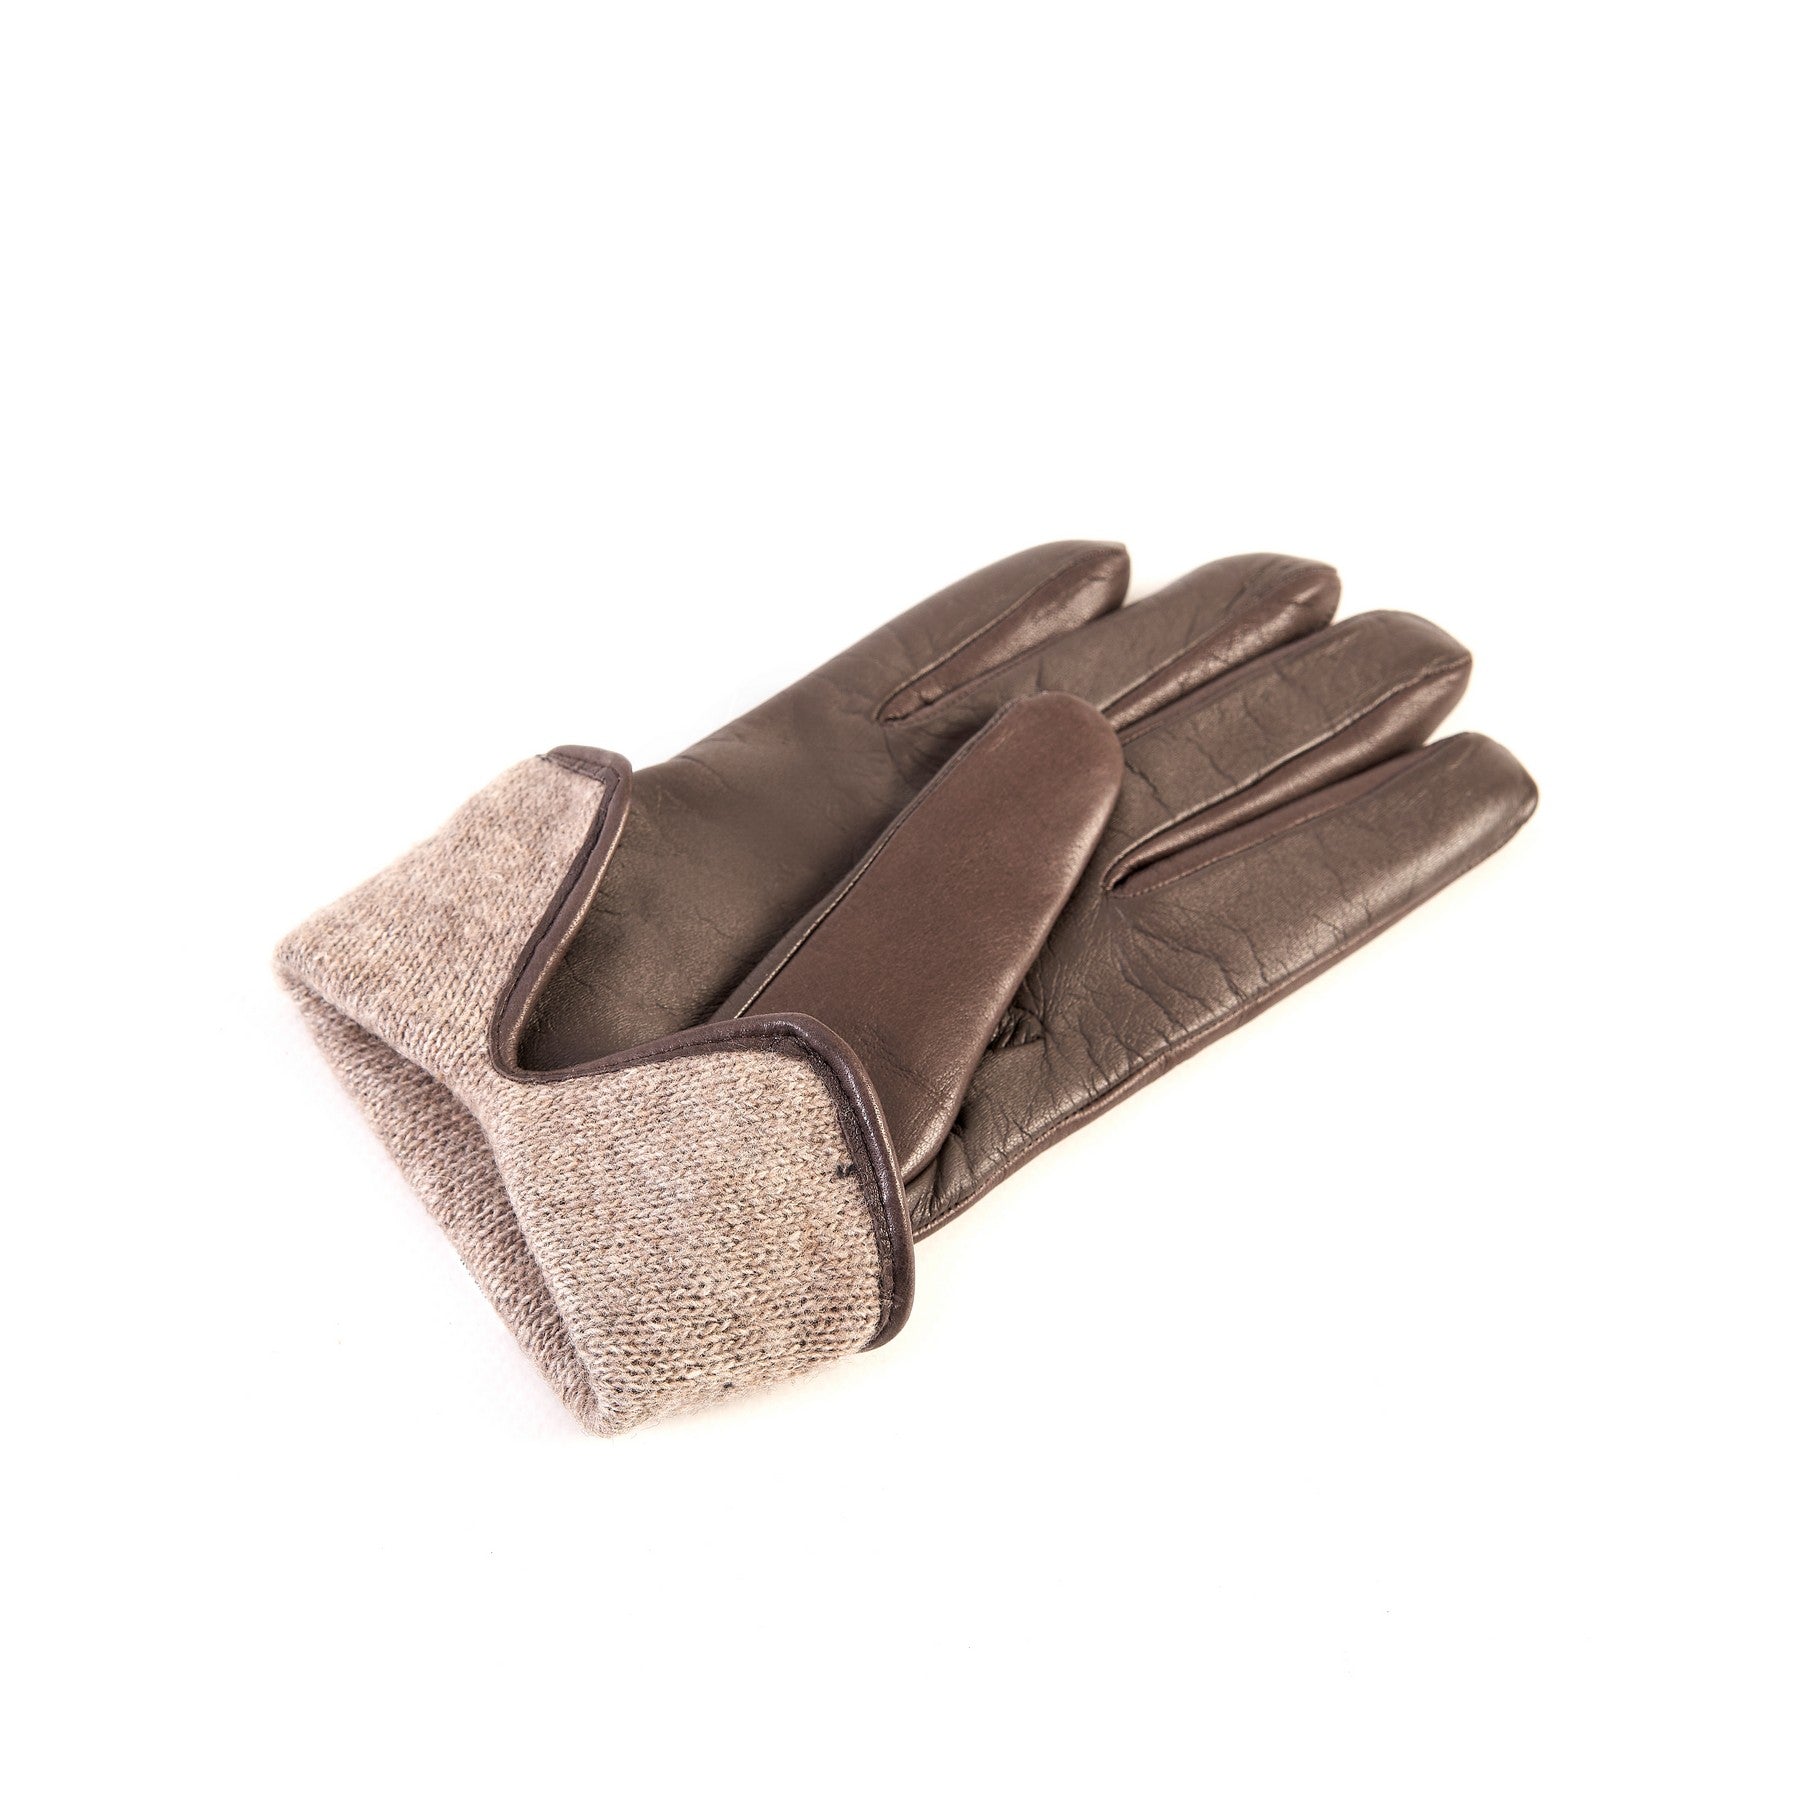 Women’s basic mud soft nappa touchscreen leather gloves with palm opening and mix cashmere lining